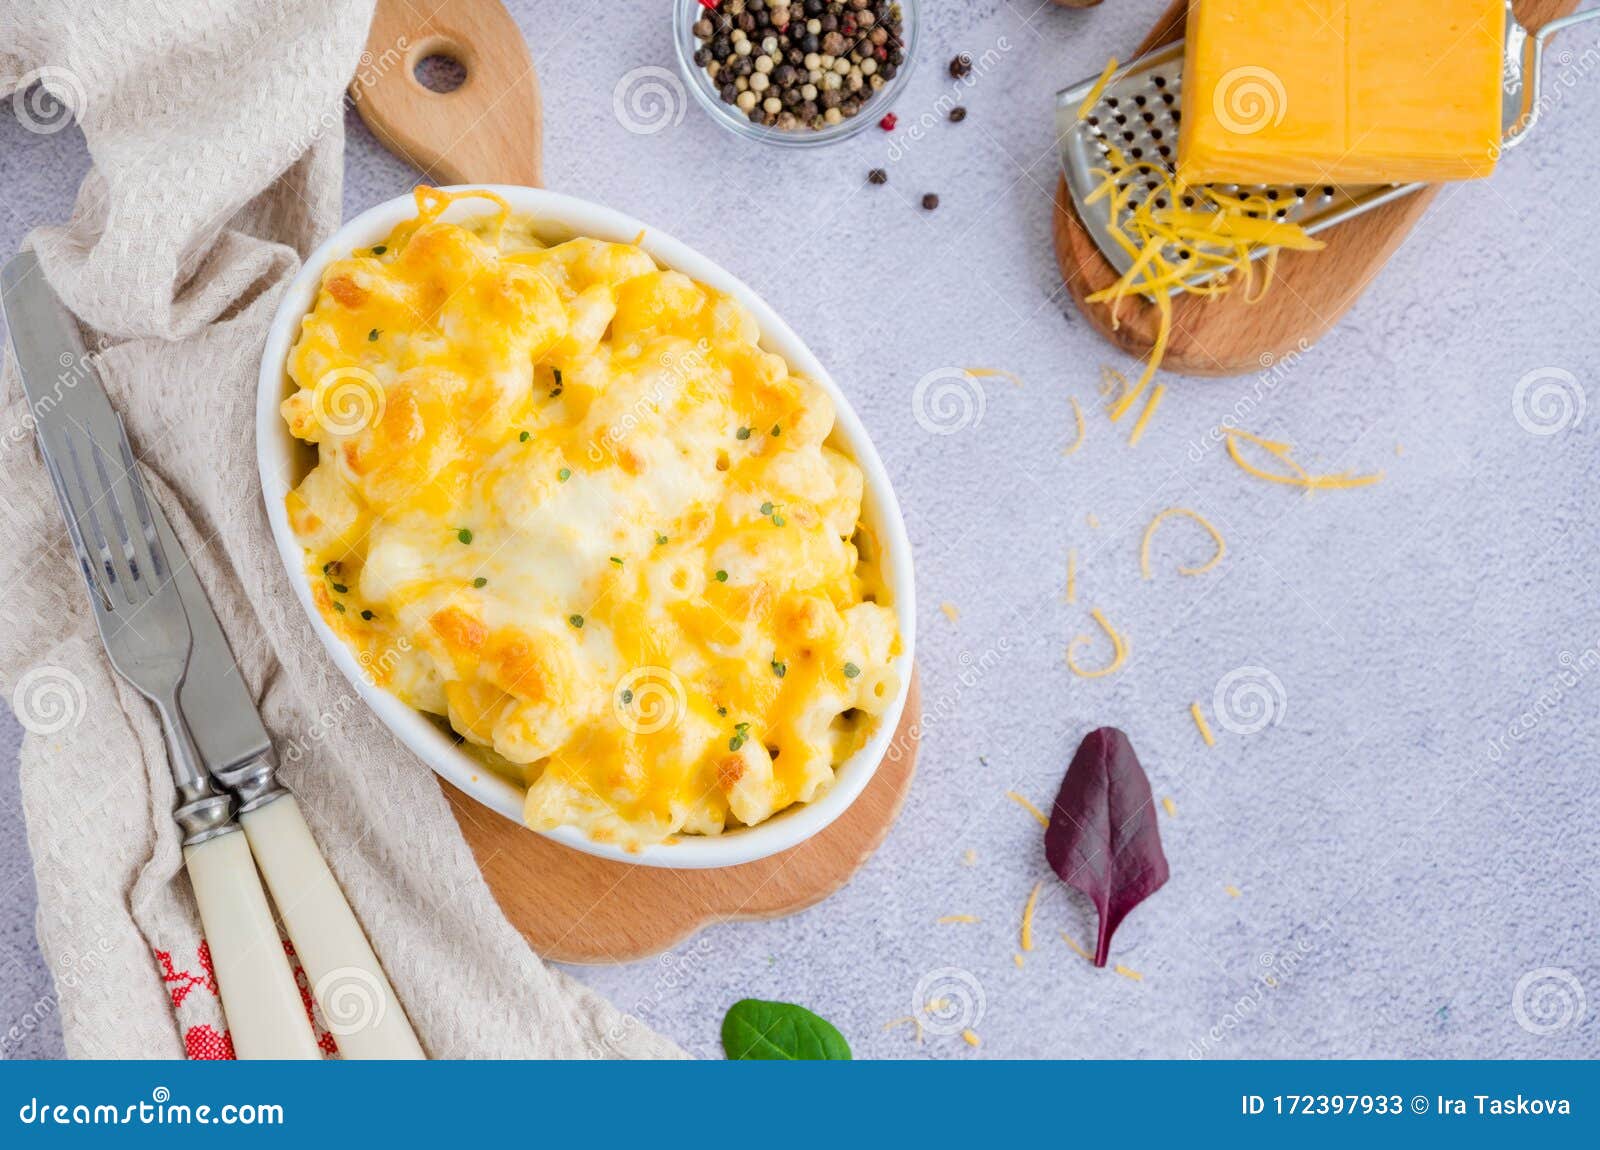 mac and cheese. traditional baked macaroni with cheese in baking form. american cuisine. horizontal orientation. top view.